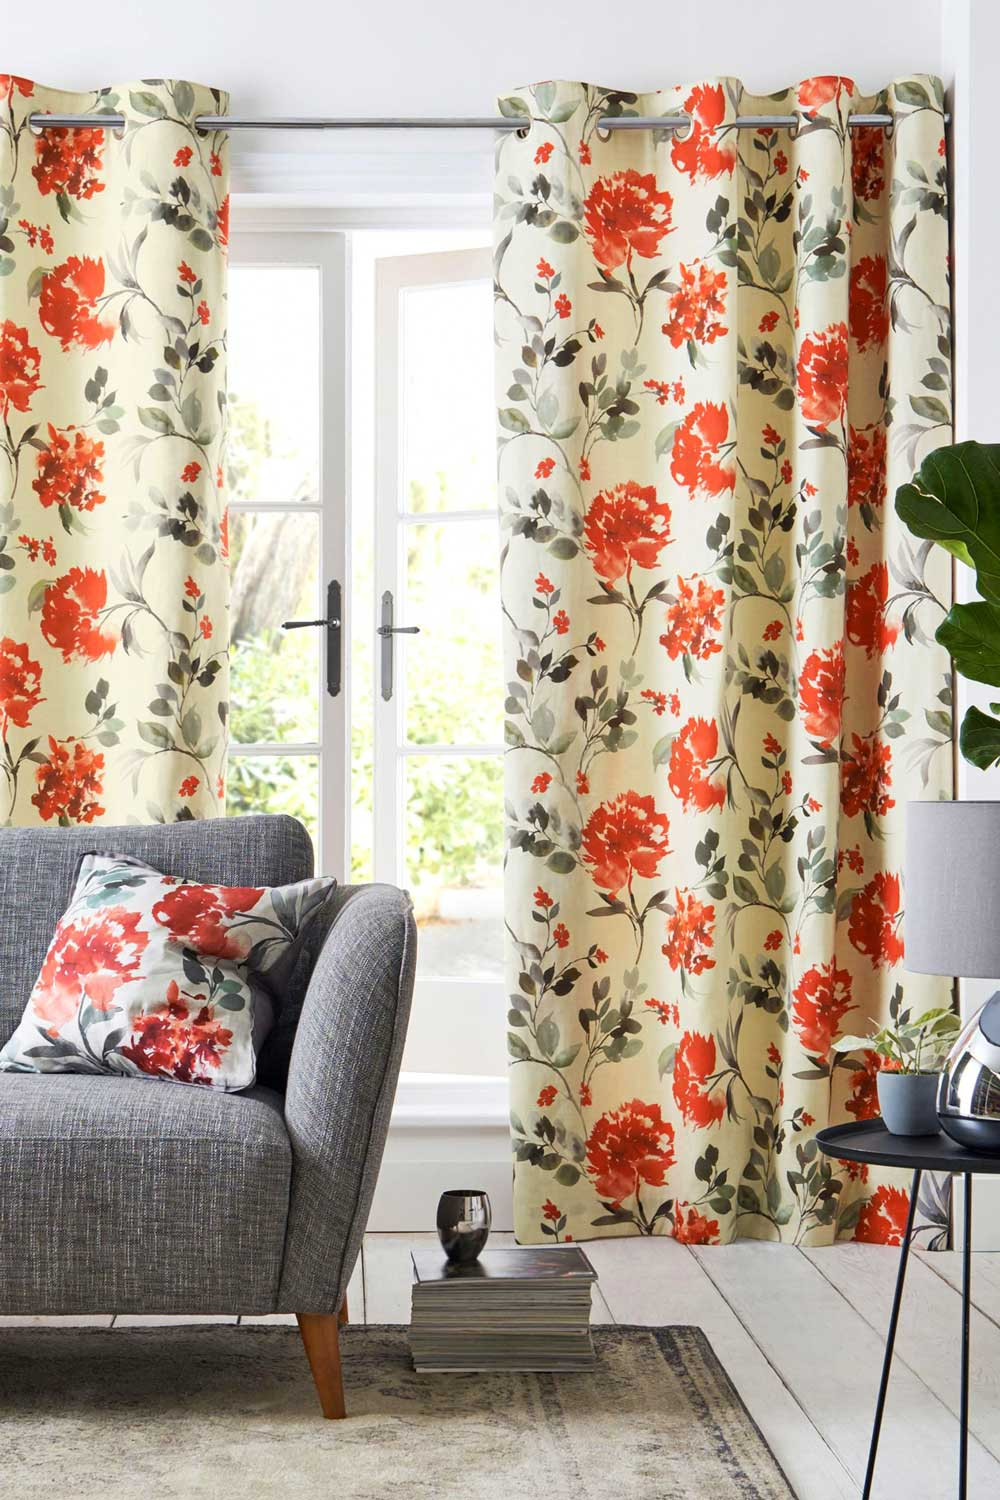 Curtains Styles For Living Room
 30 Beautiful Living Room Curtain Ideas and Patterns